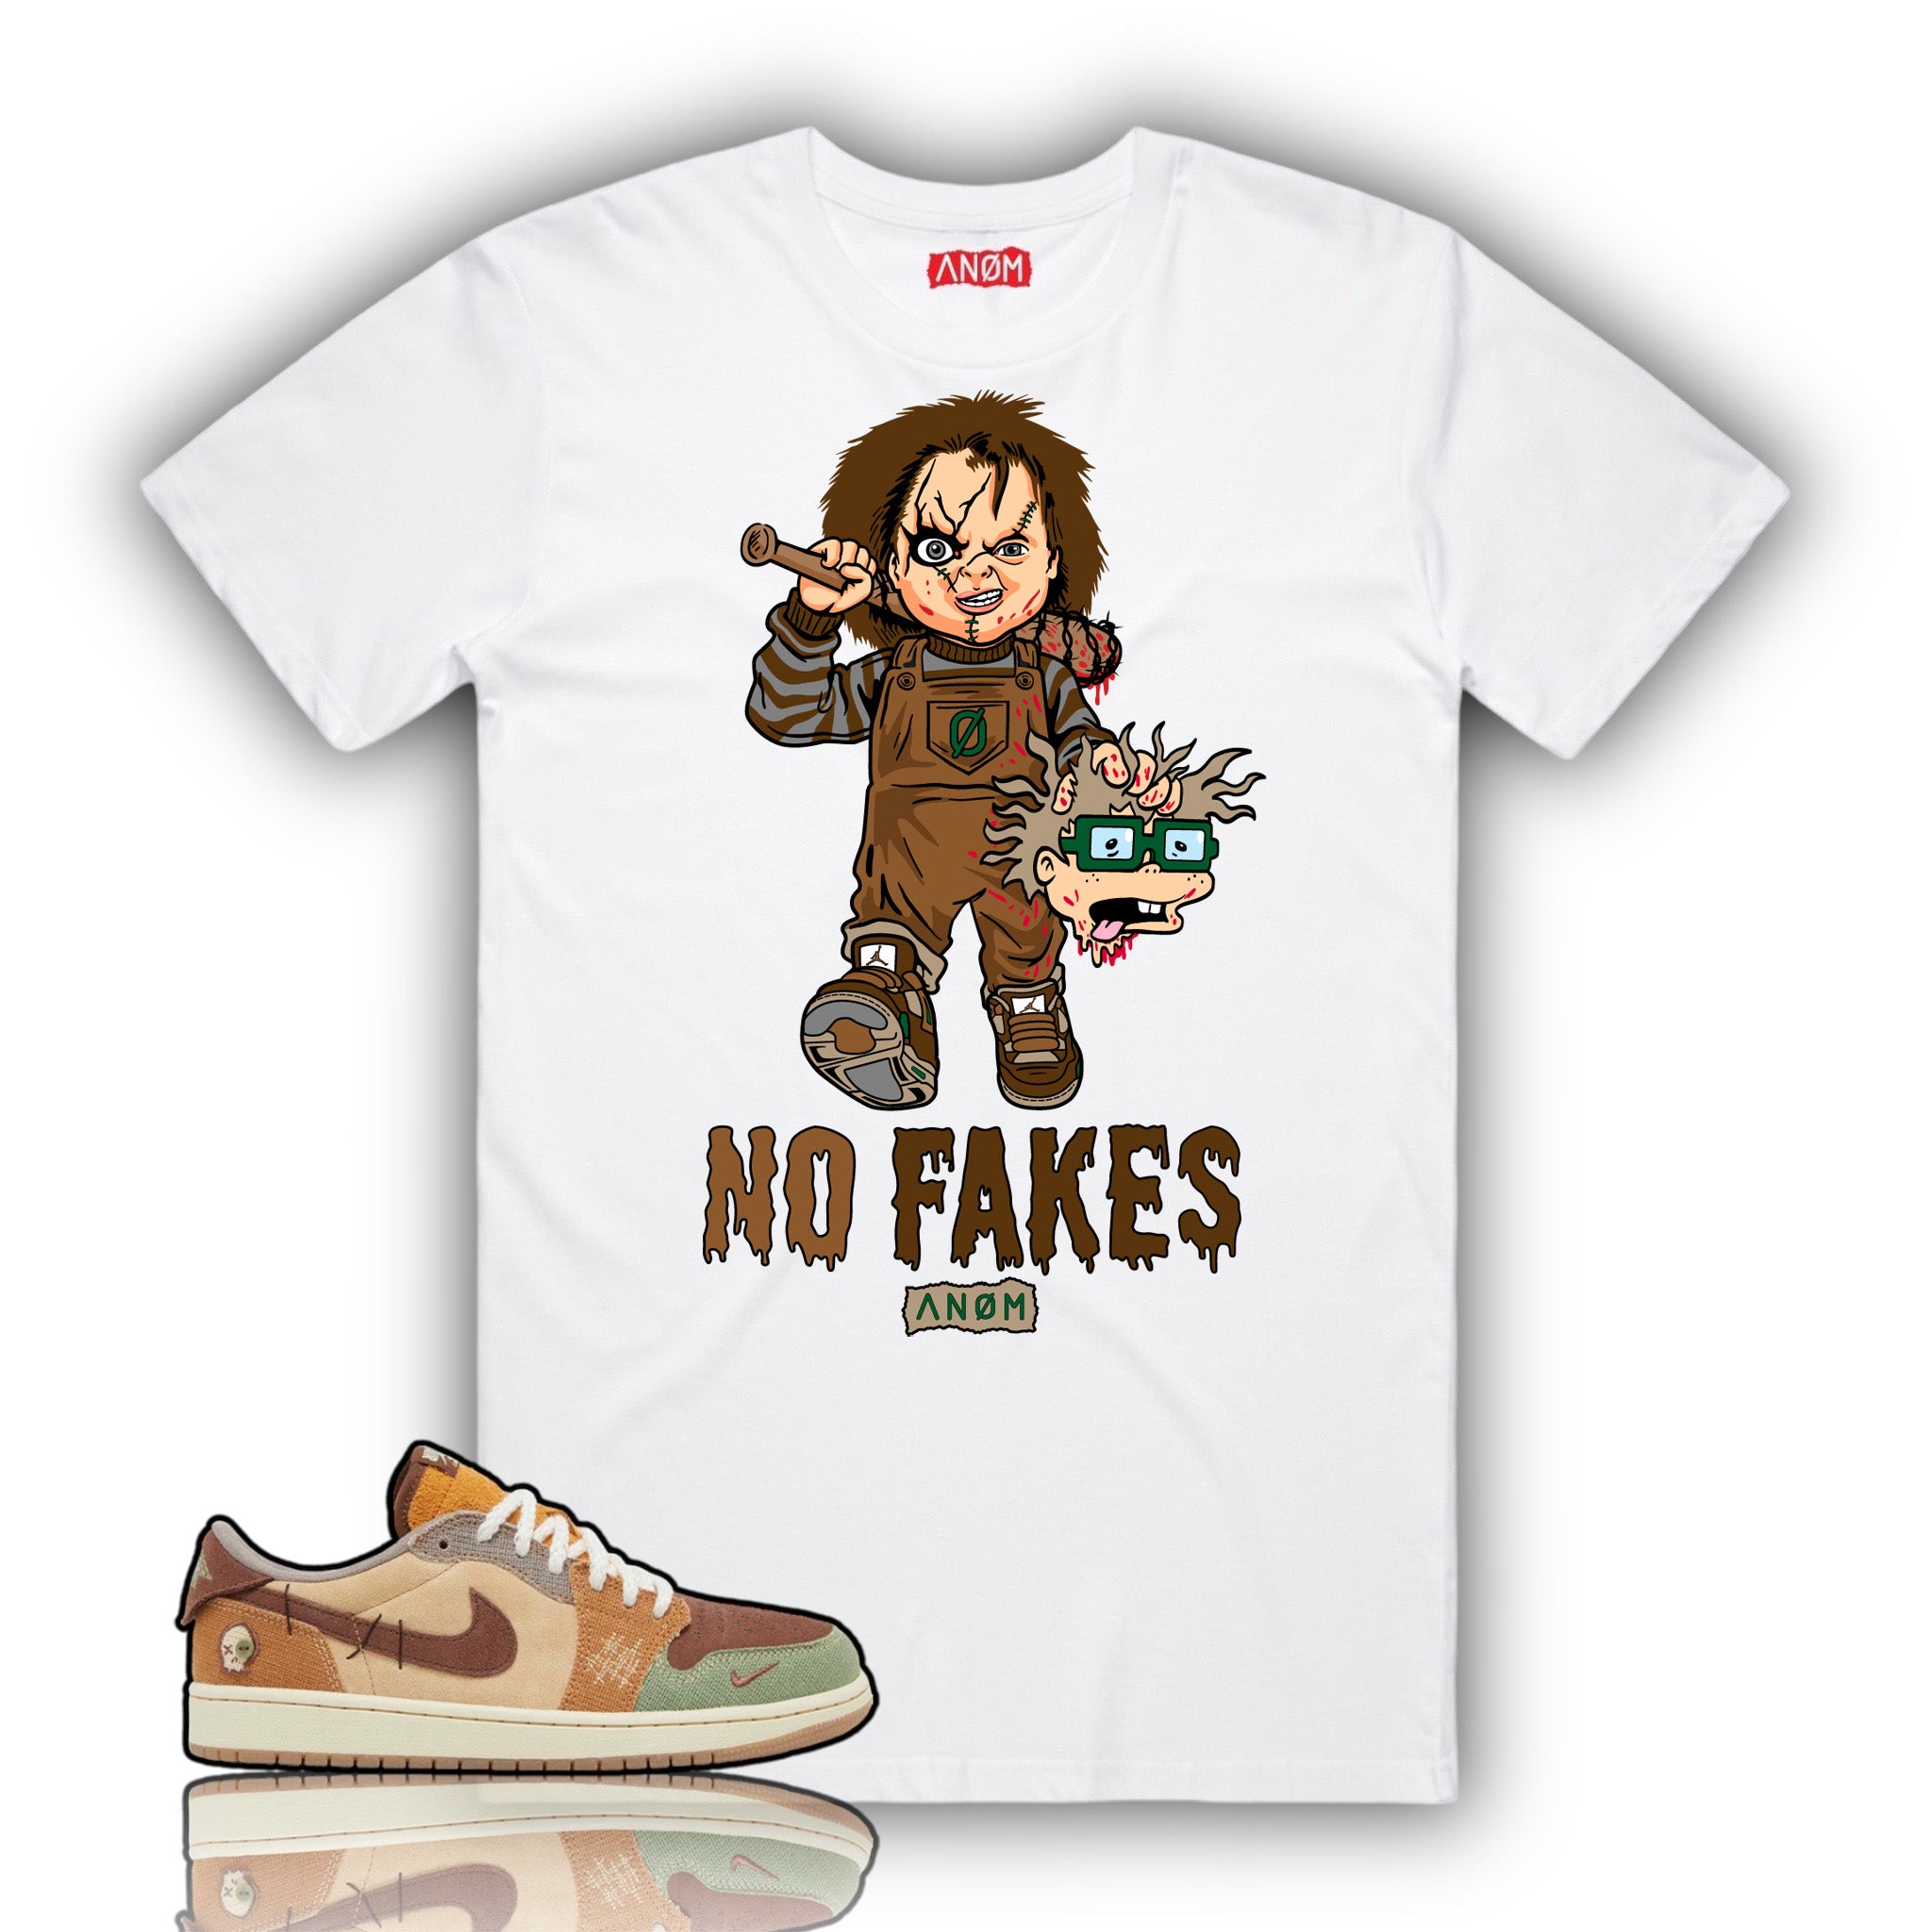 CHUCKY NO FAKES TEE-J1 LOW X ZION TIE/BCK